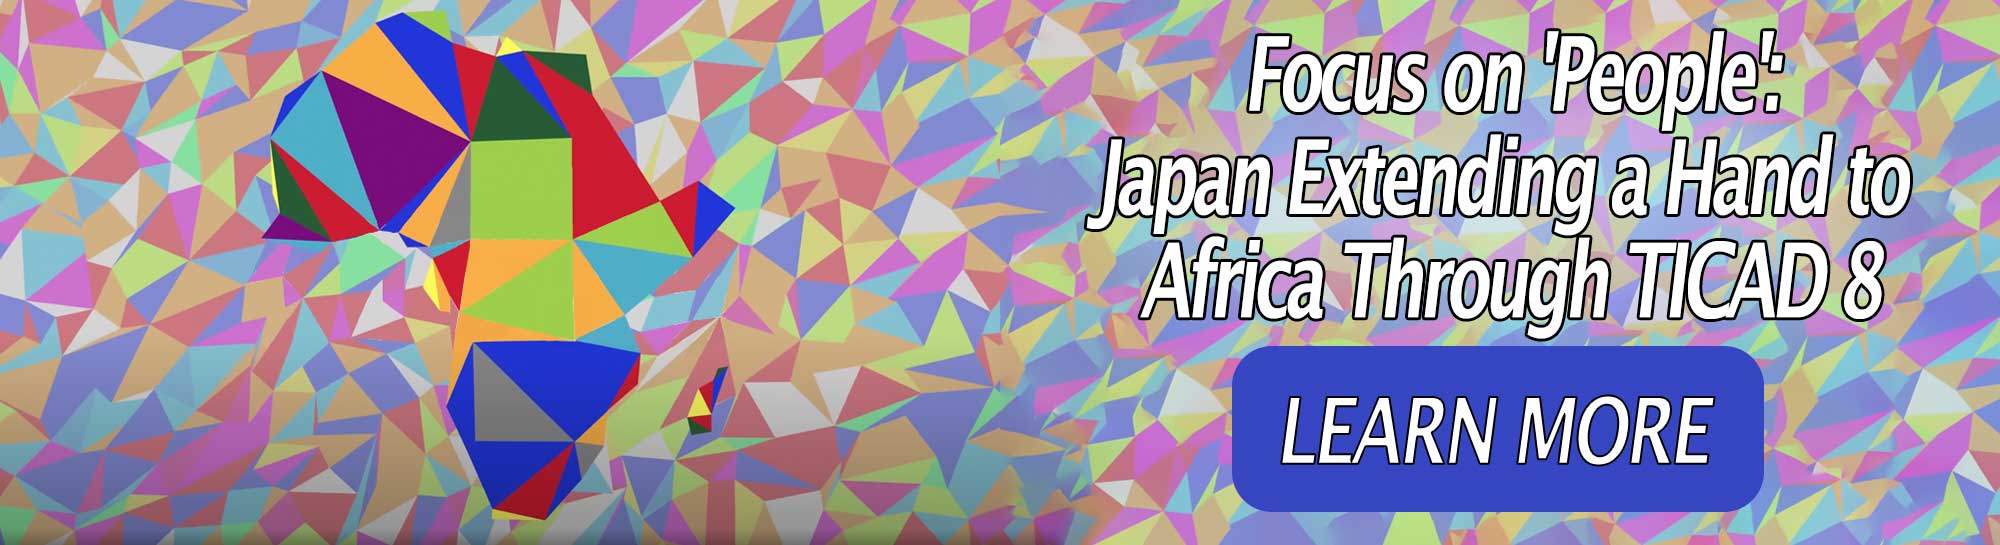 Focus on 'People': Japan Extends Hand to Africa through TICAD 8